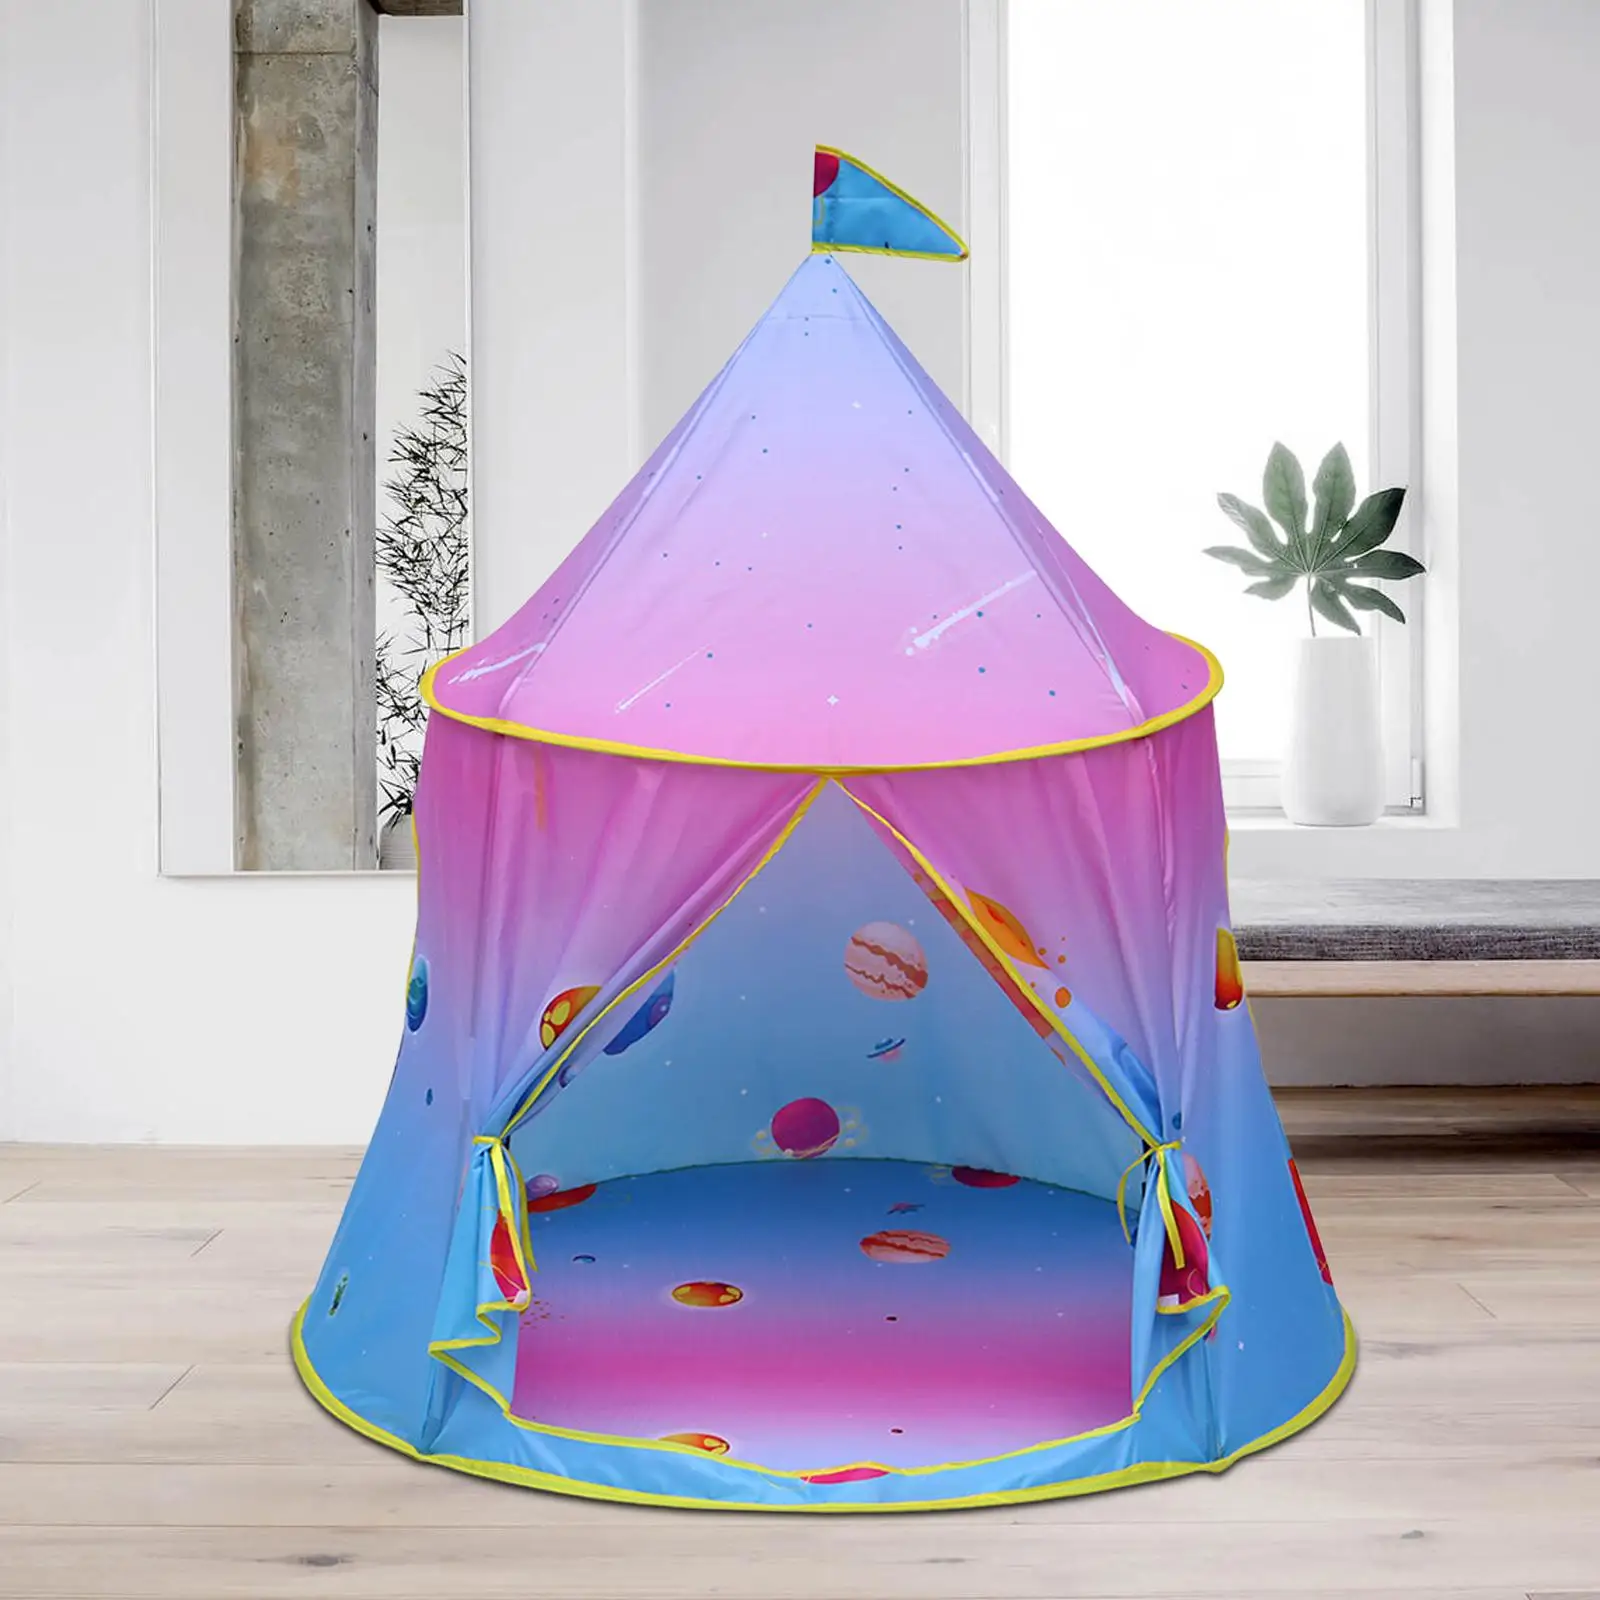 Play Tent Portable Easy Assemble Kids Play House Outer Space Rocket Foldable Pretend Play Tent Castle for Outdoor Boy Girl Gifts